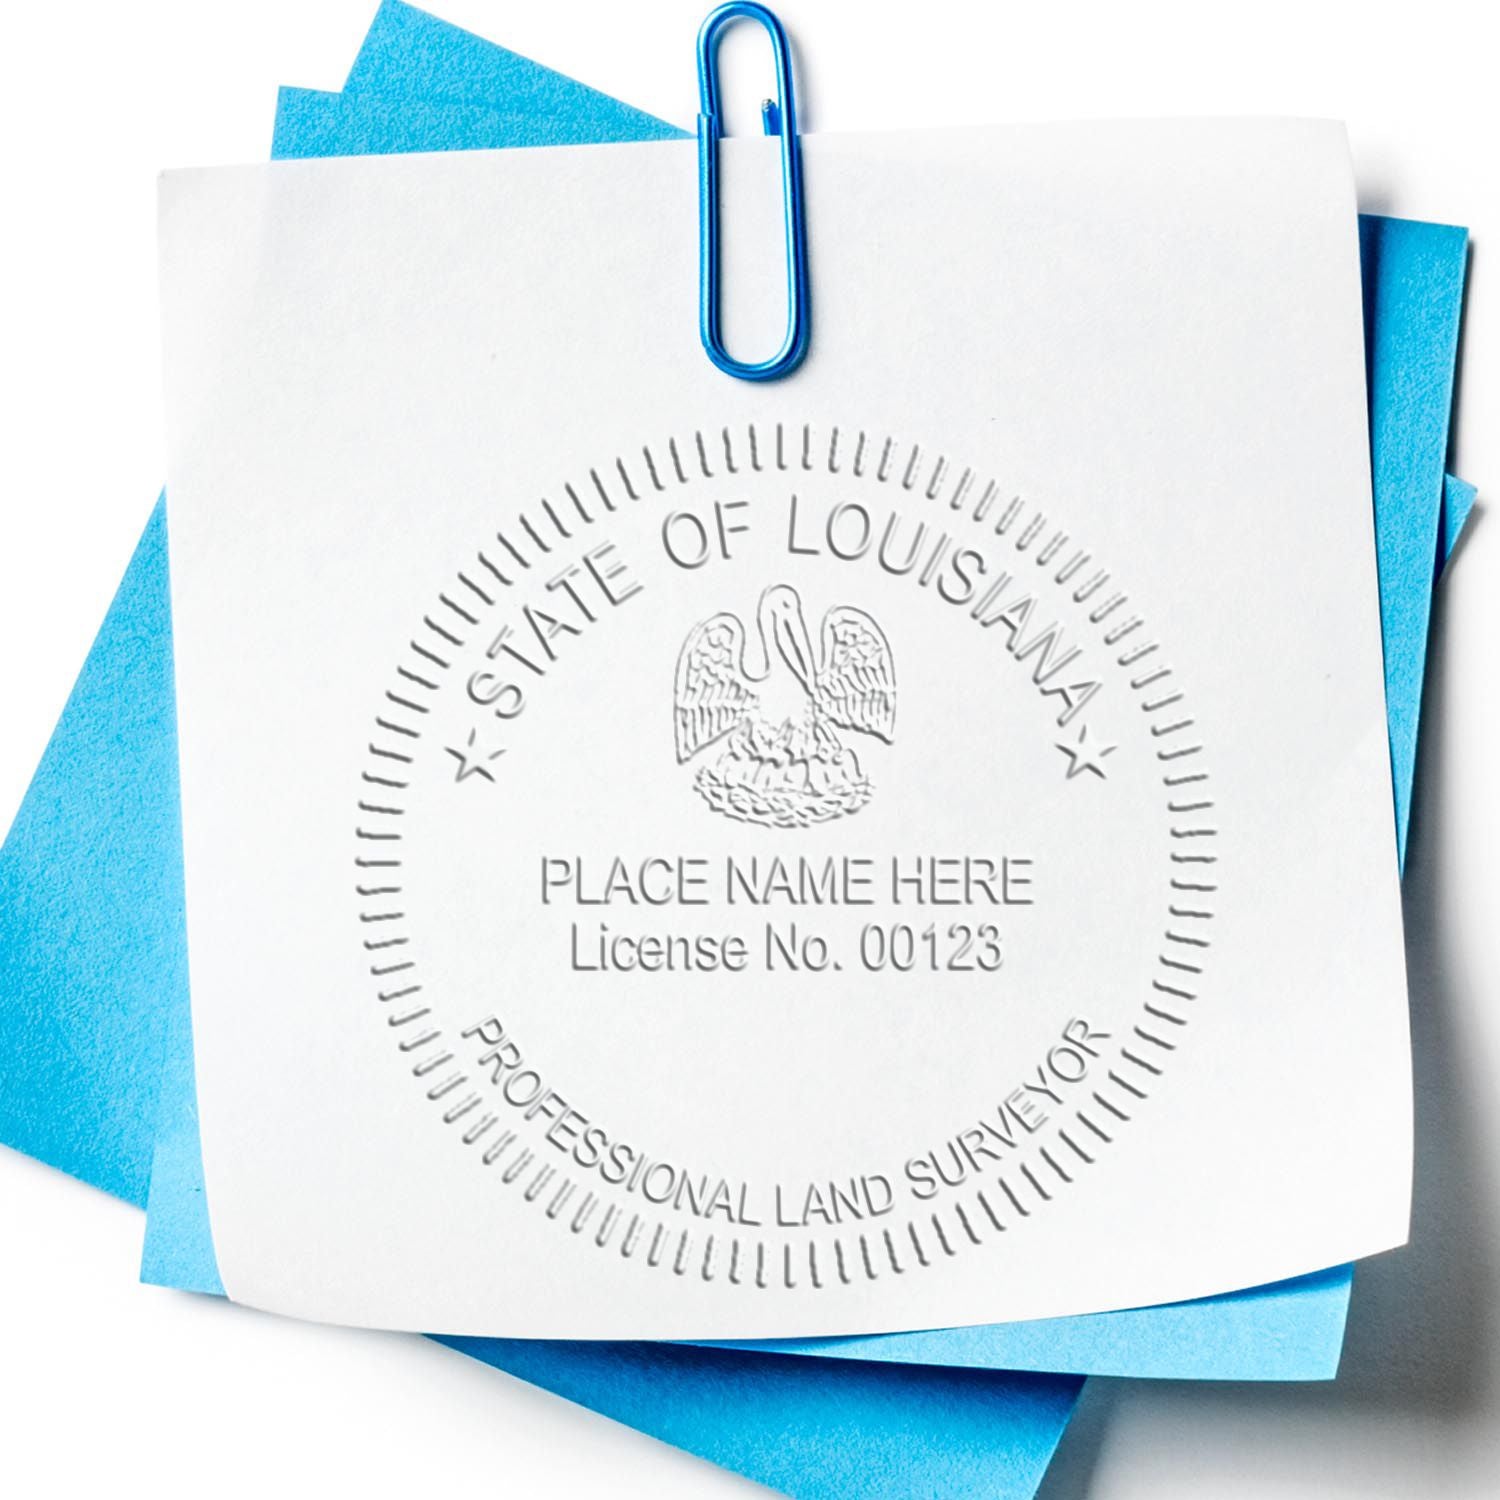 The main image for the Handheld Louisiana Land Surveyor Seal depicting a sample of the imprint and electronic files